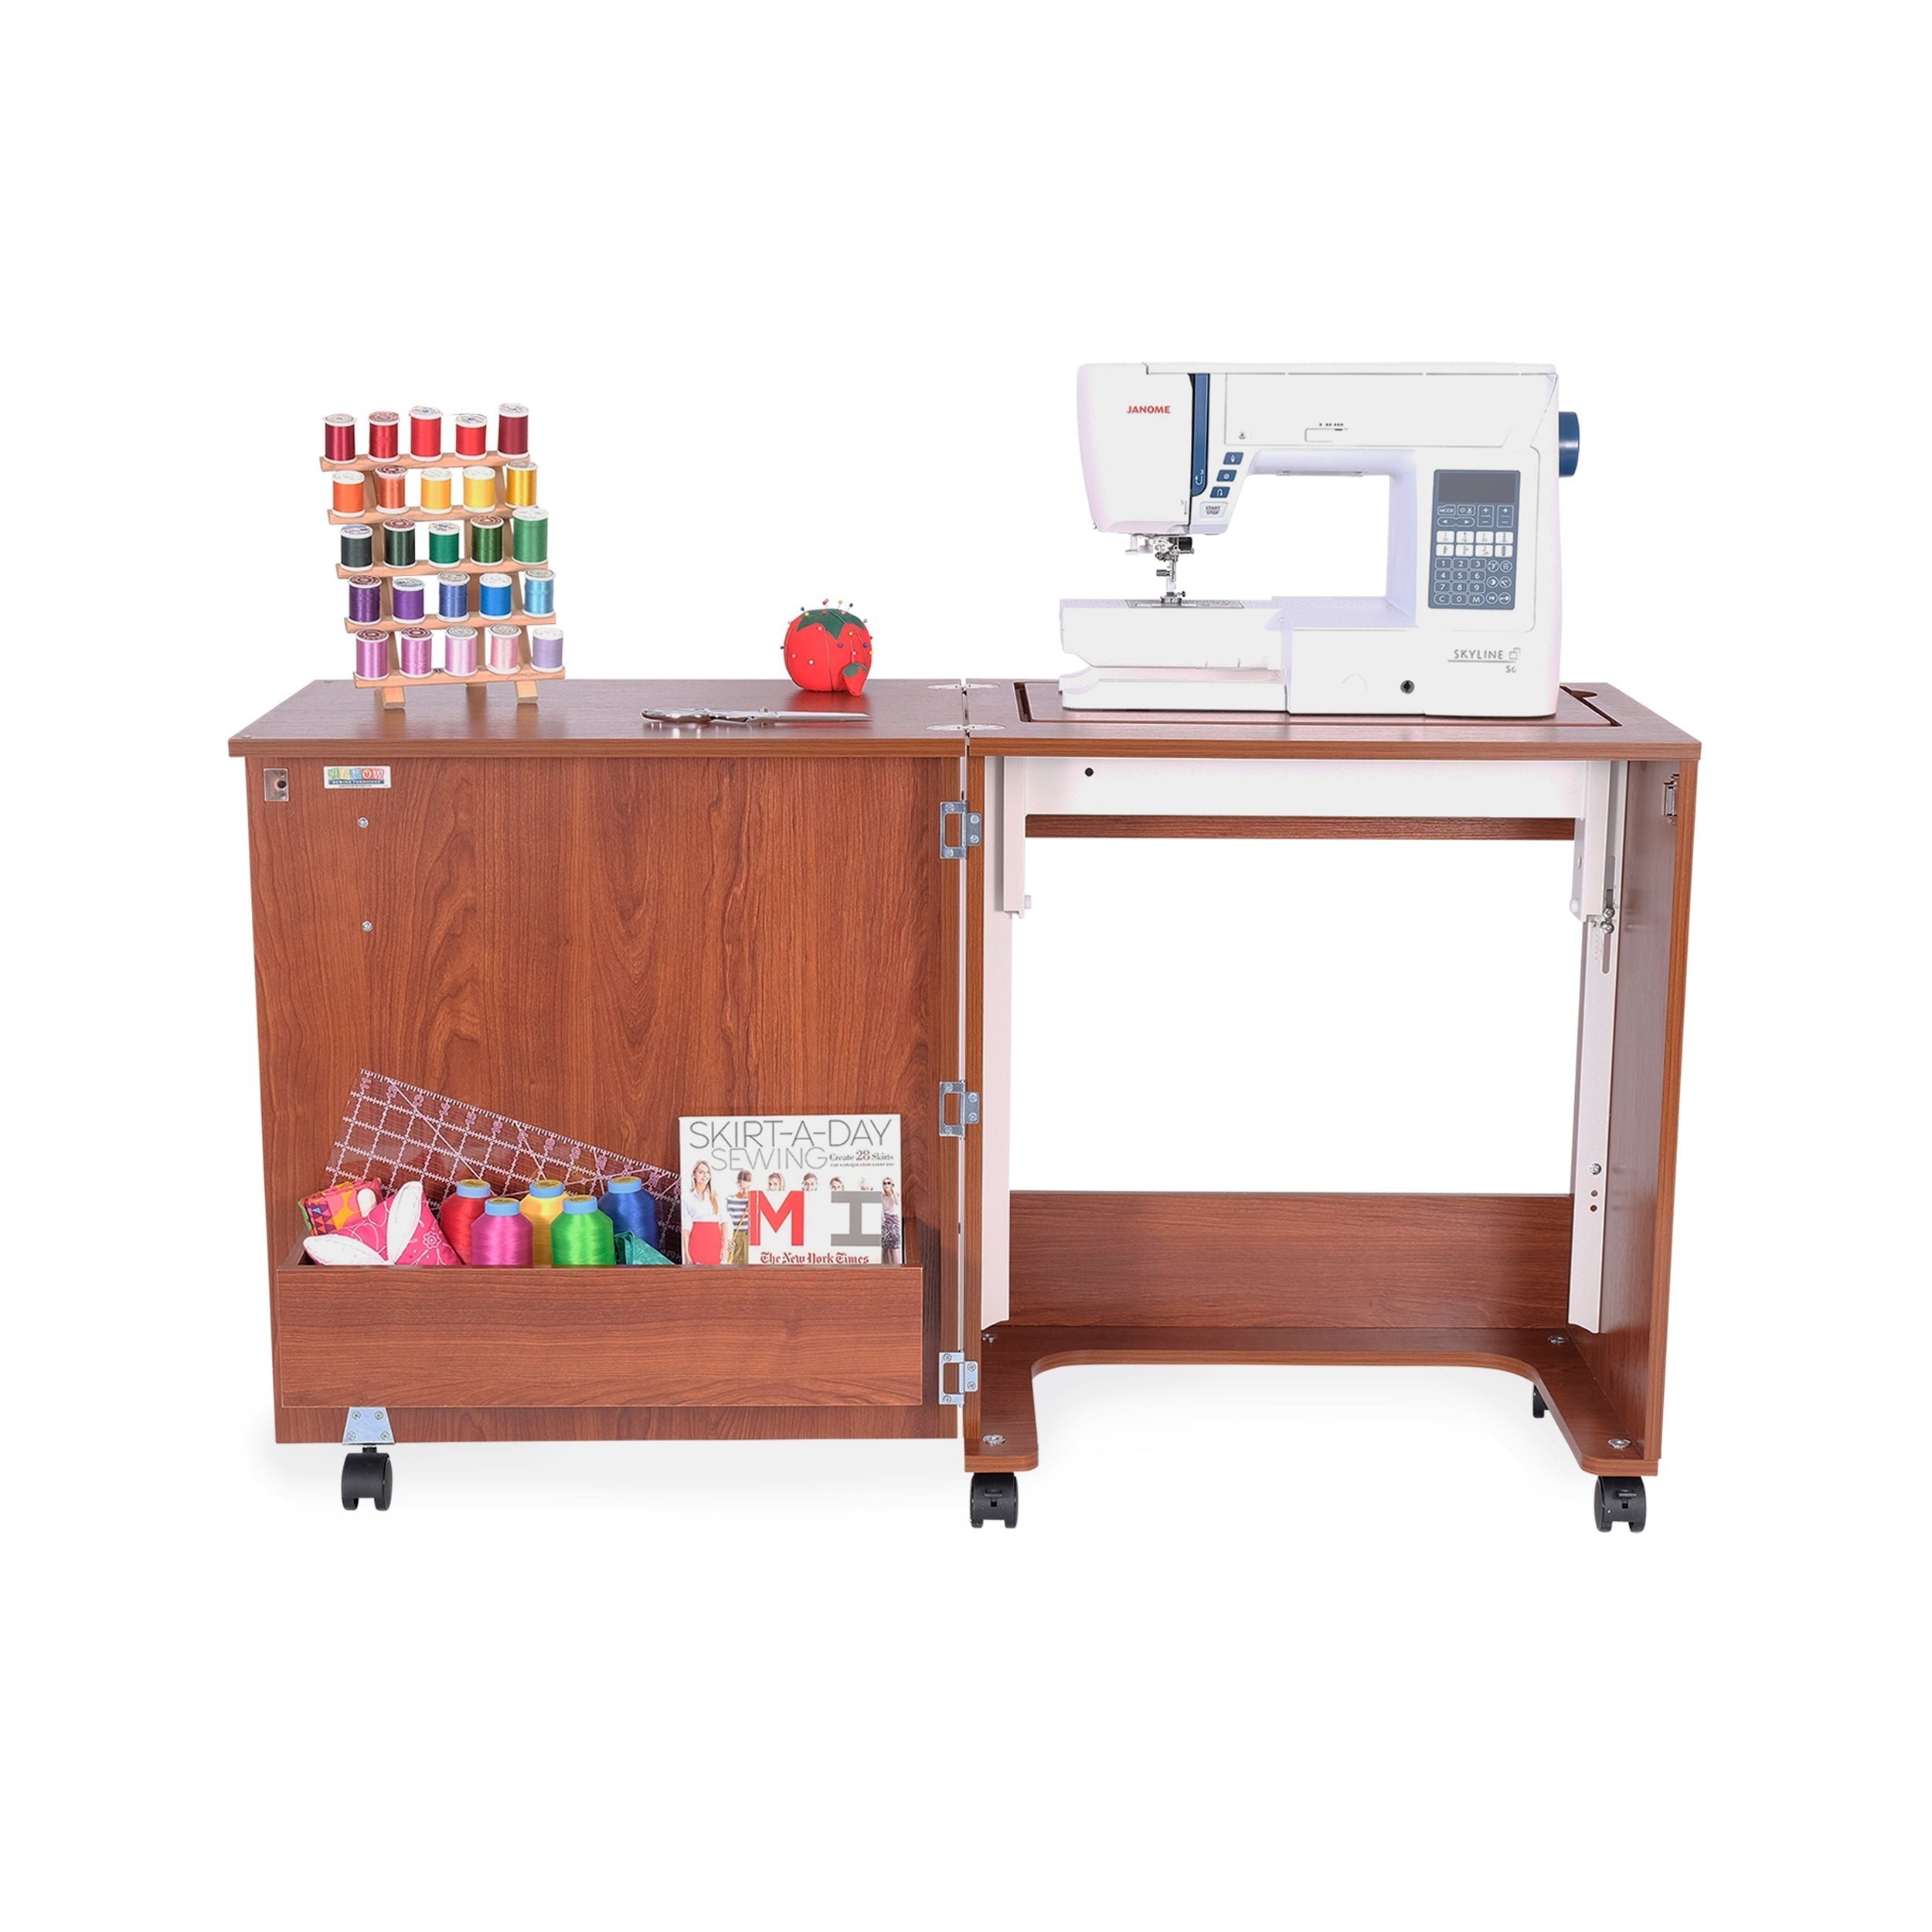 Judy Sewing Cabinet Teak-Arrow Classic Sewing Furniture-My Favorite Quilt Store